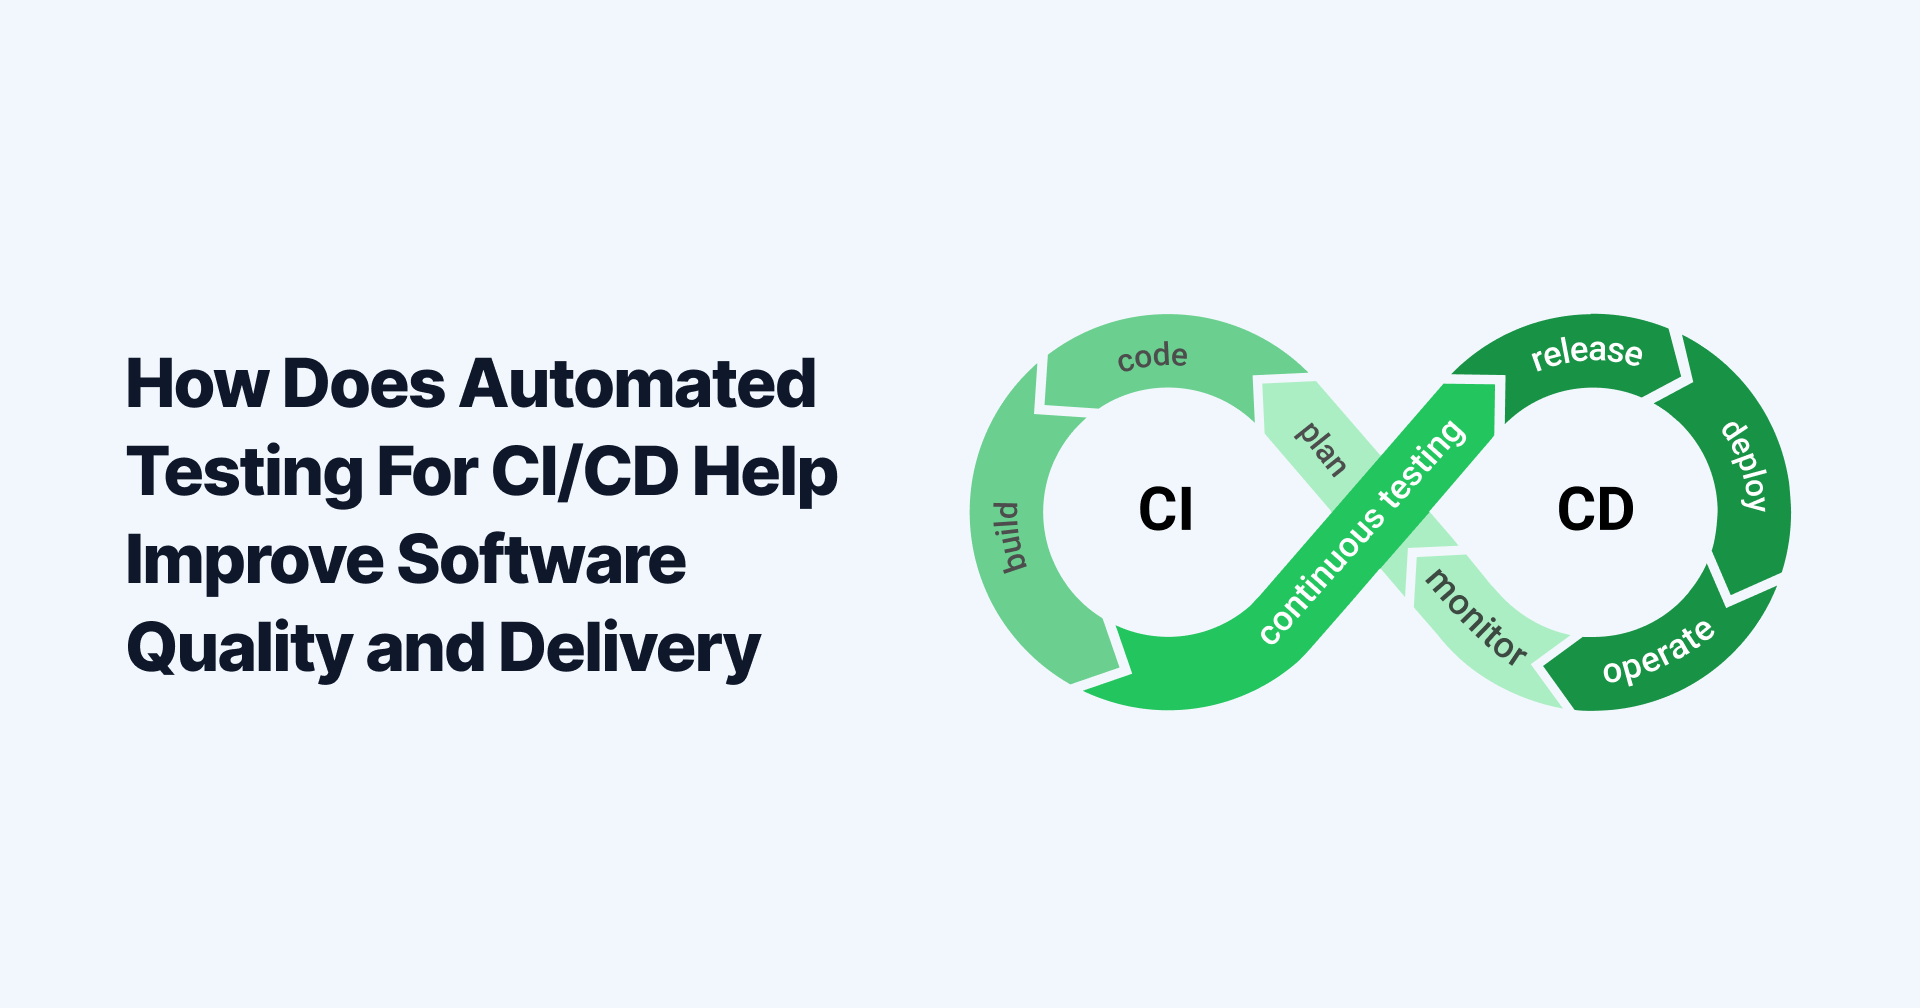 How Does Automated Testing For CI/CD Help Improve Software Quality and Delivery